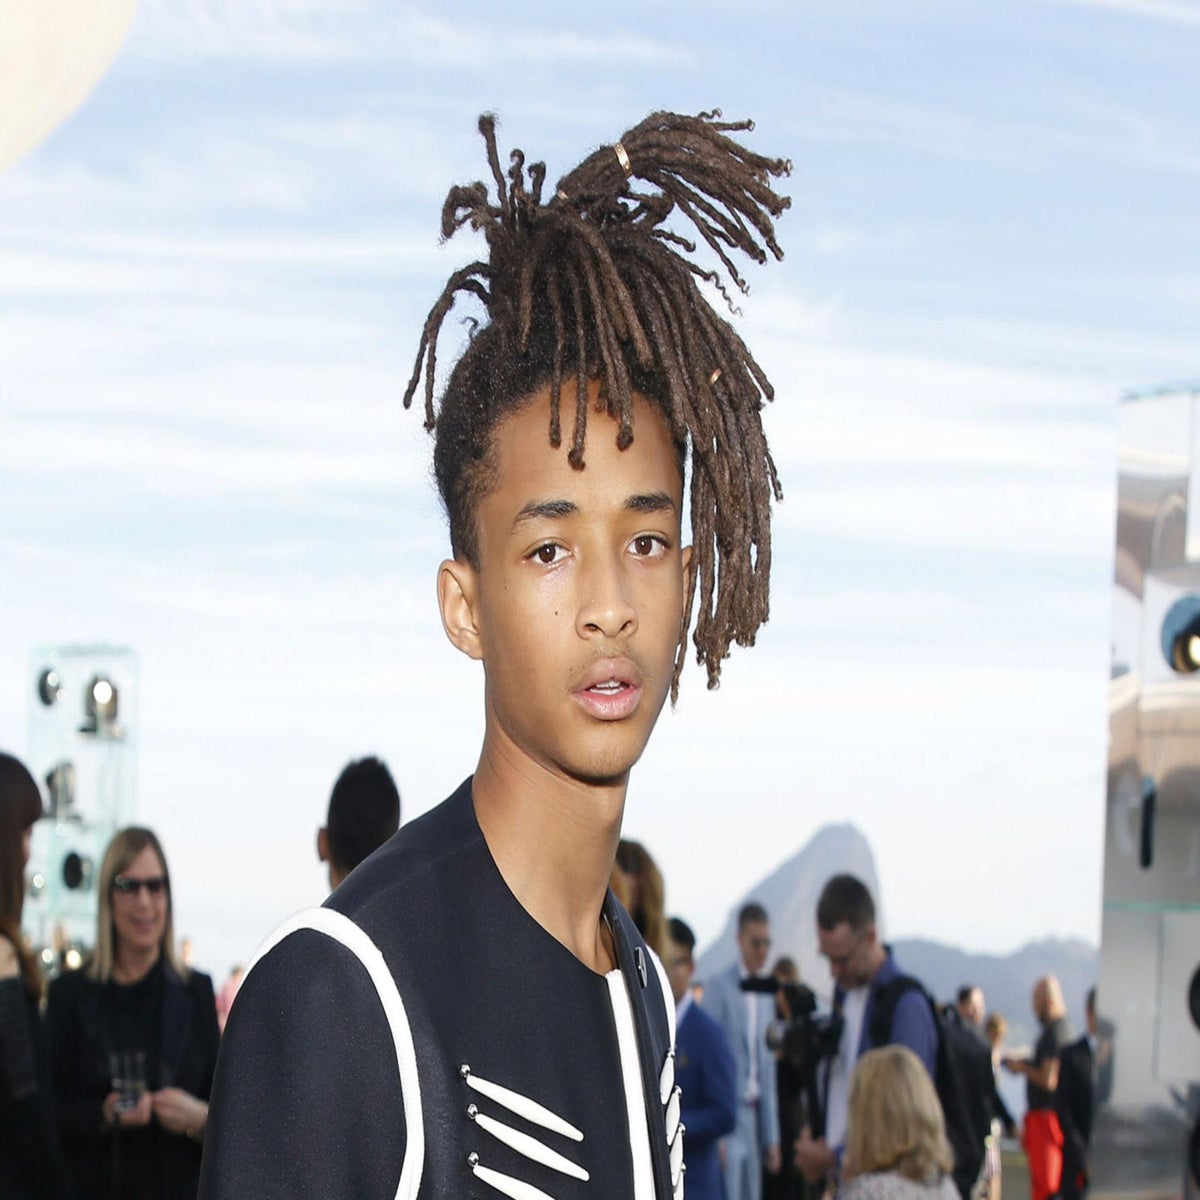 Jaden Smith explains he wears a skirt so future generations won't get  bullied for not conforming to gender stereotypes, The Independent